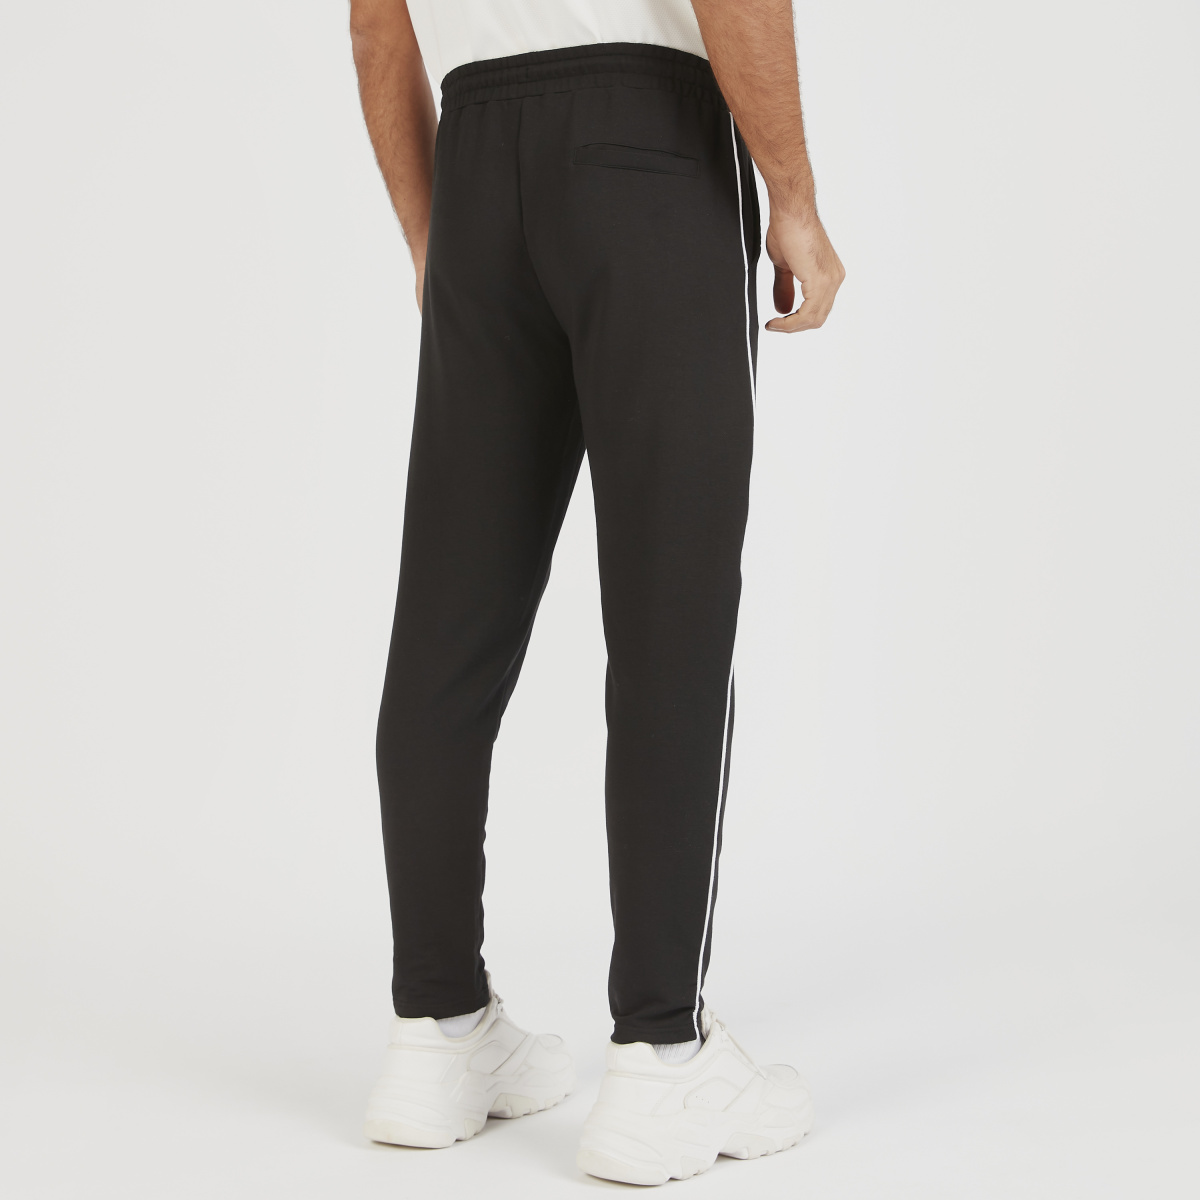 Buy Solid Track Pants with Drawstring Closure and Pockets